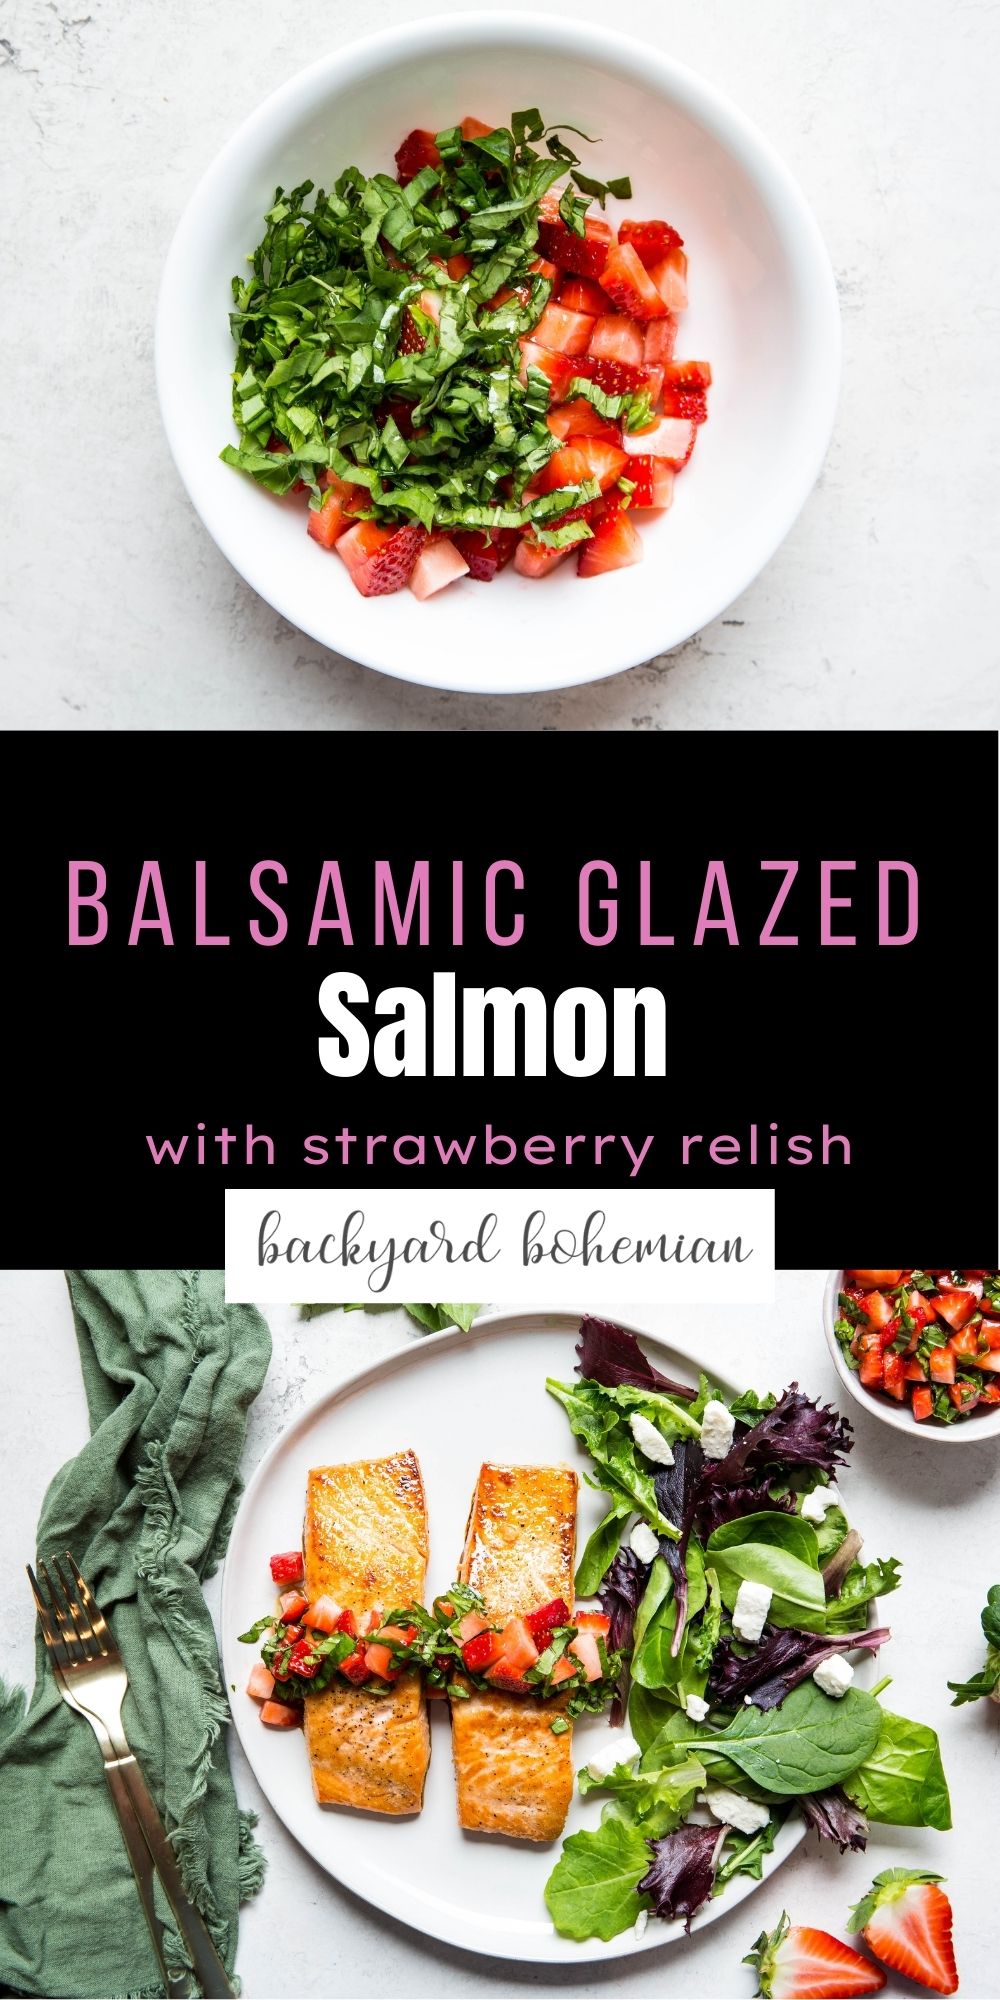 Honey Balsamic Glazed Salmon With Strawberry Relish is packed with fresh flavors and is such an easy 30 minute meal! The salmon filets are perfectly seared to juicy, tender perfection. This easy salmon recipe will have you hooked!